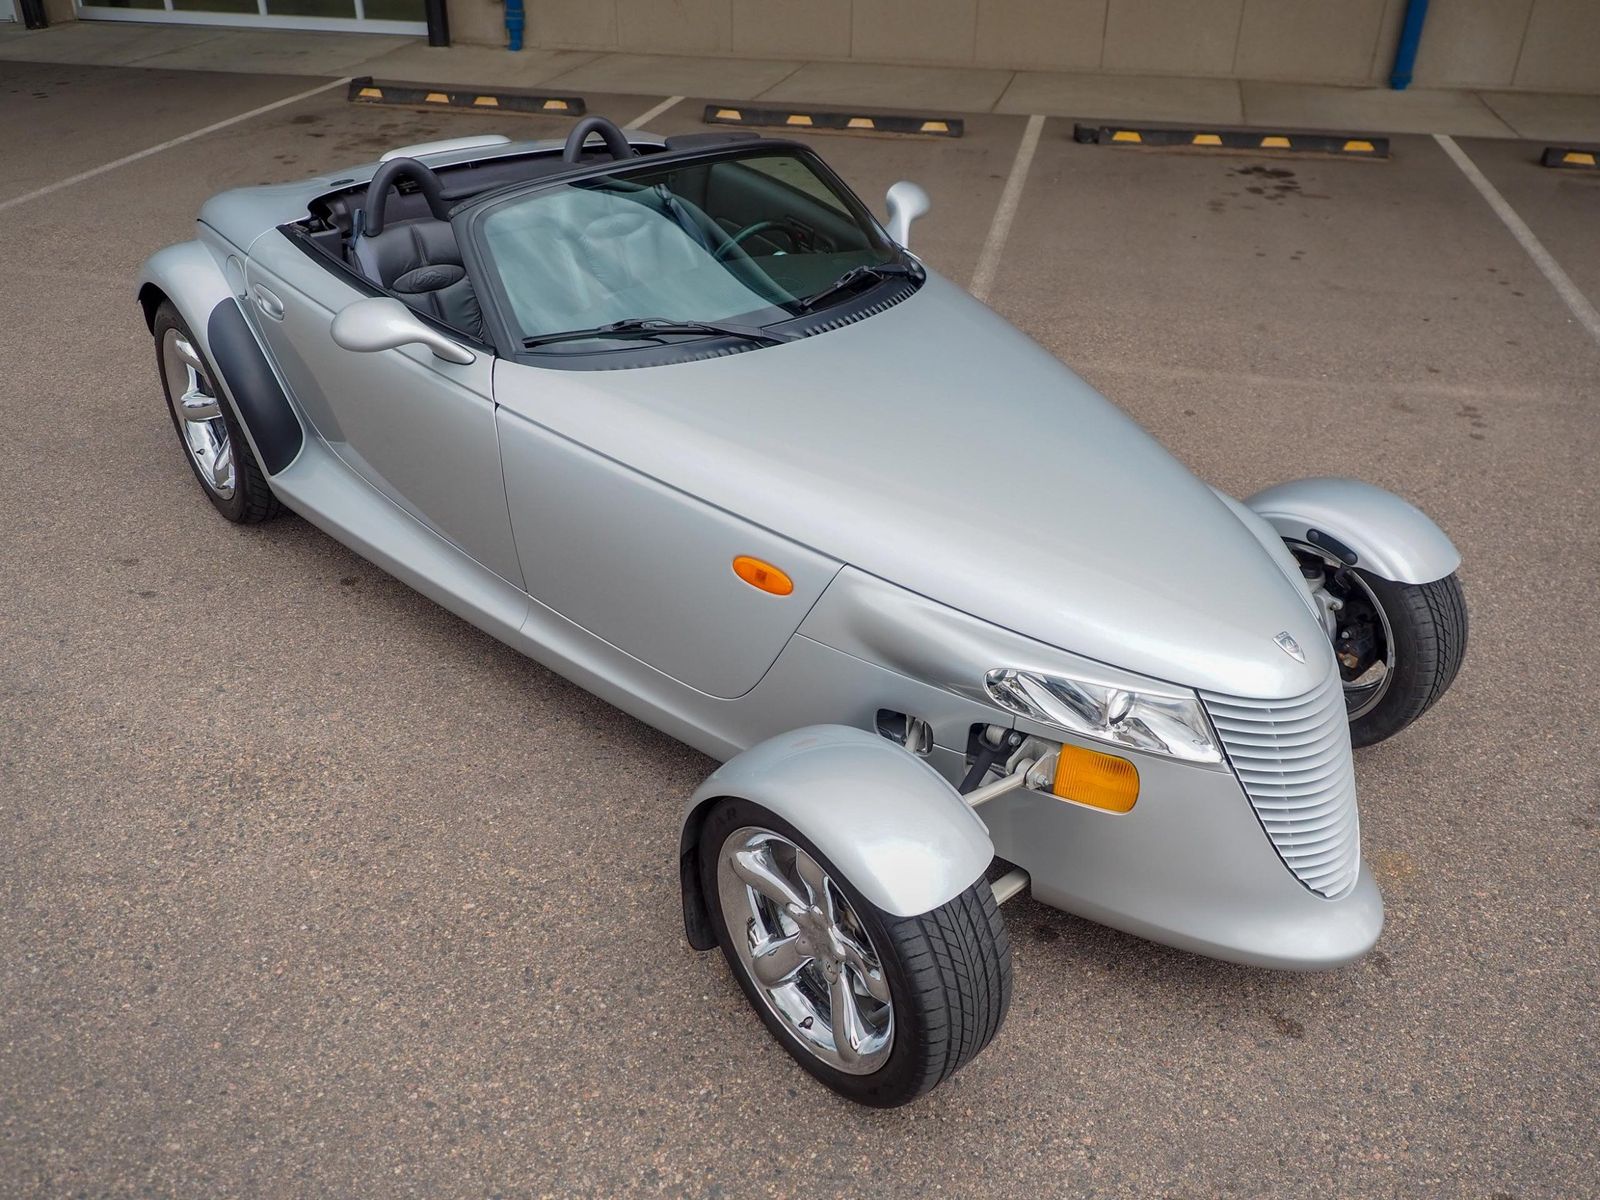 2000 Plymouth Prowler 13